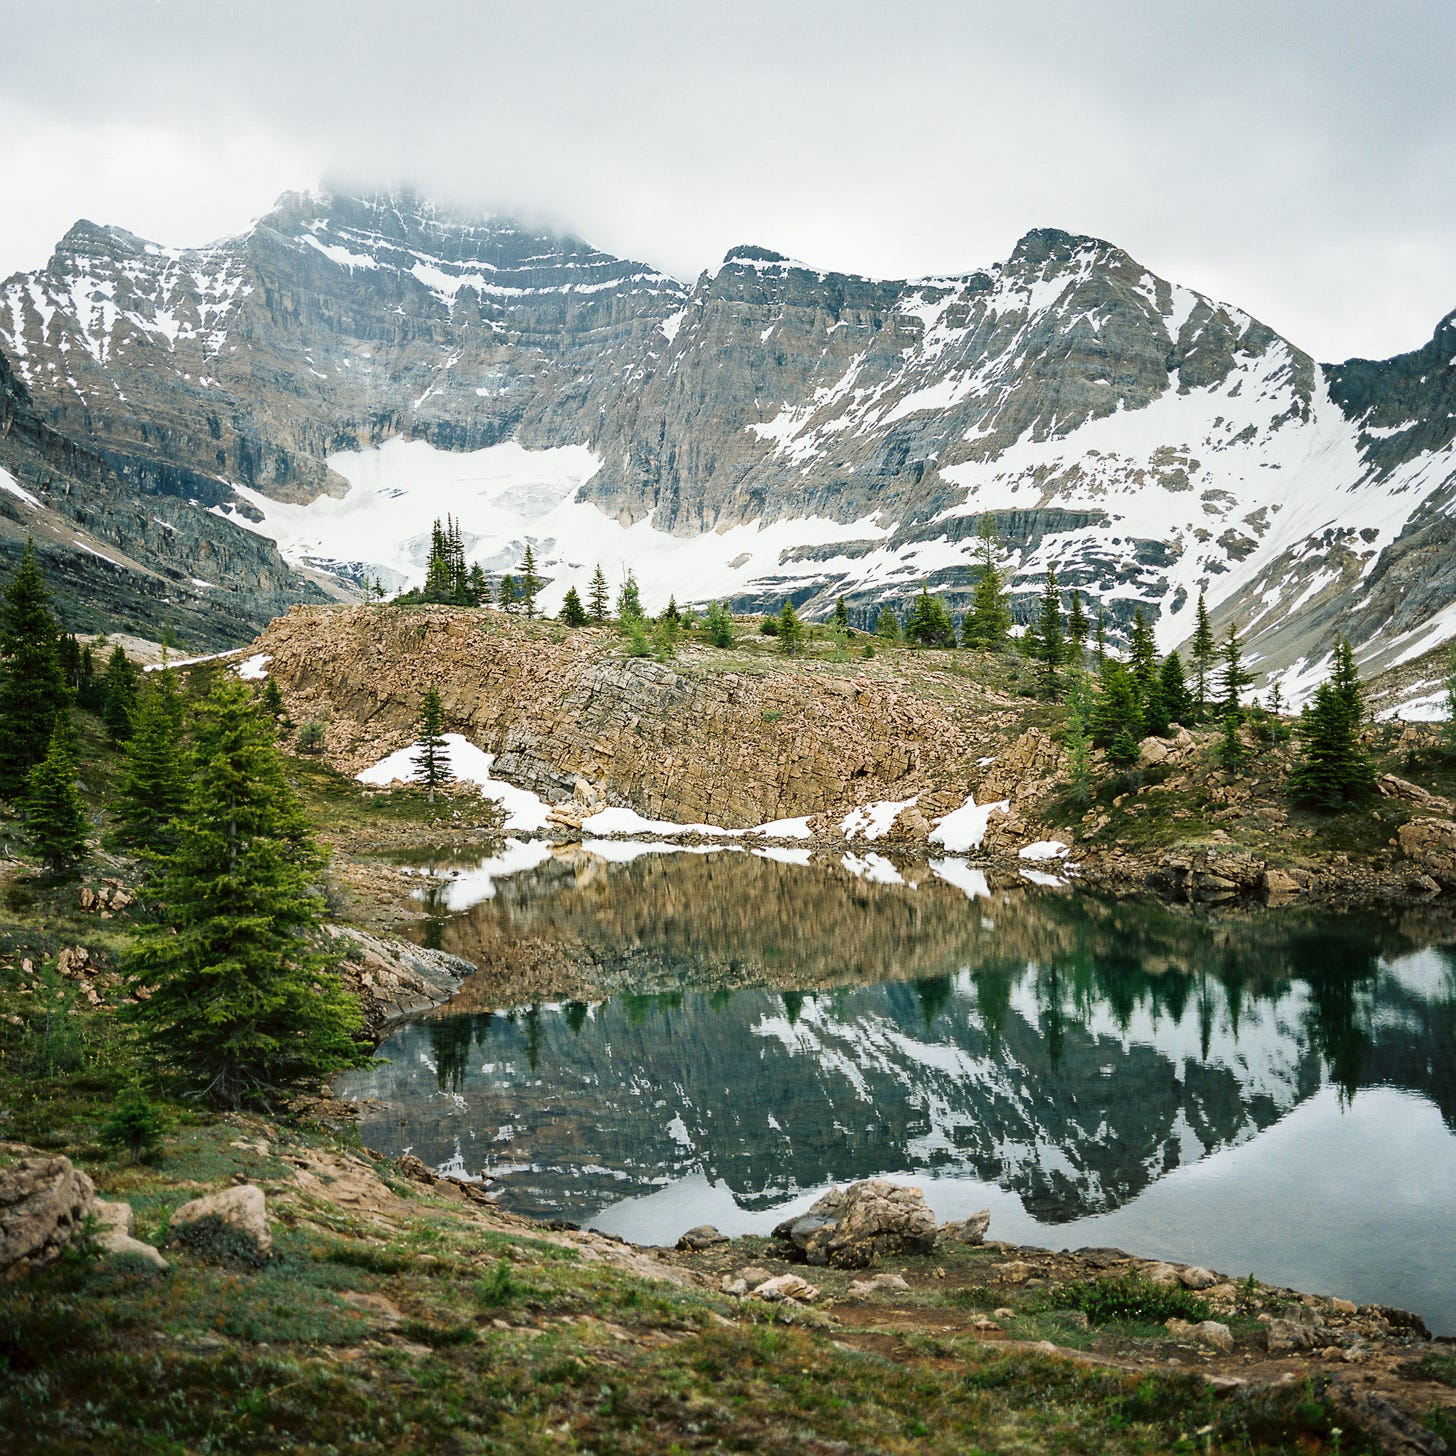 Photo of an alpine lake backed by snowy mountains